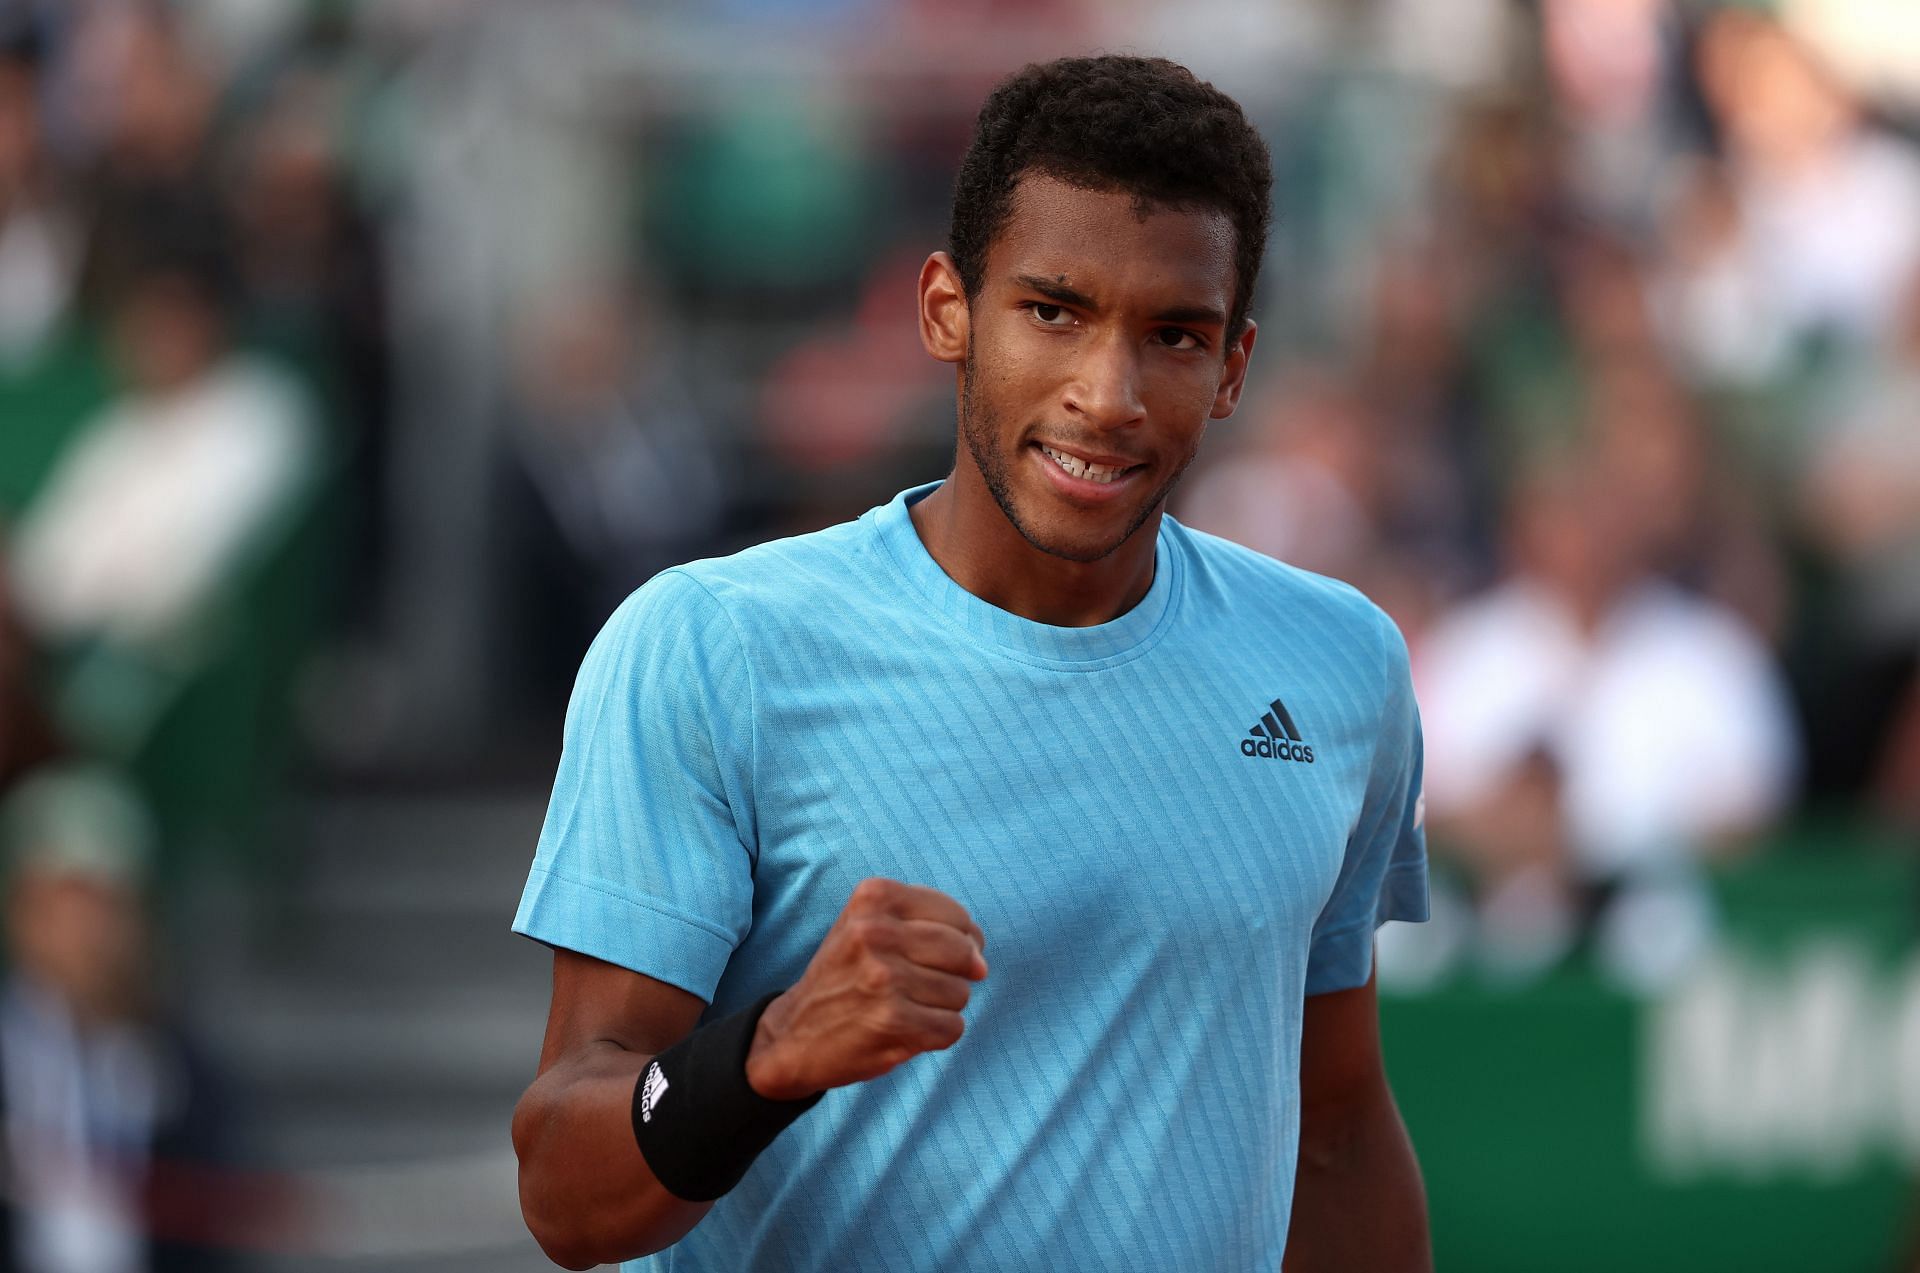 Felix Auger-Aliassime will hope to return to form at the 2022 Barcelona Open Casper Ruud is one of the players to watch at the Barcelona Open.